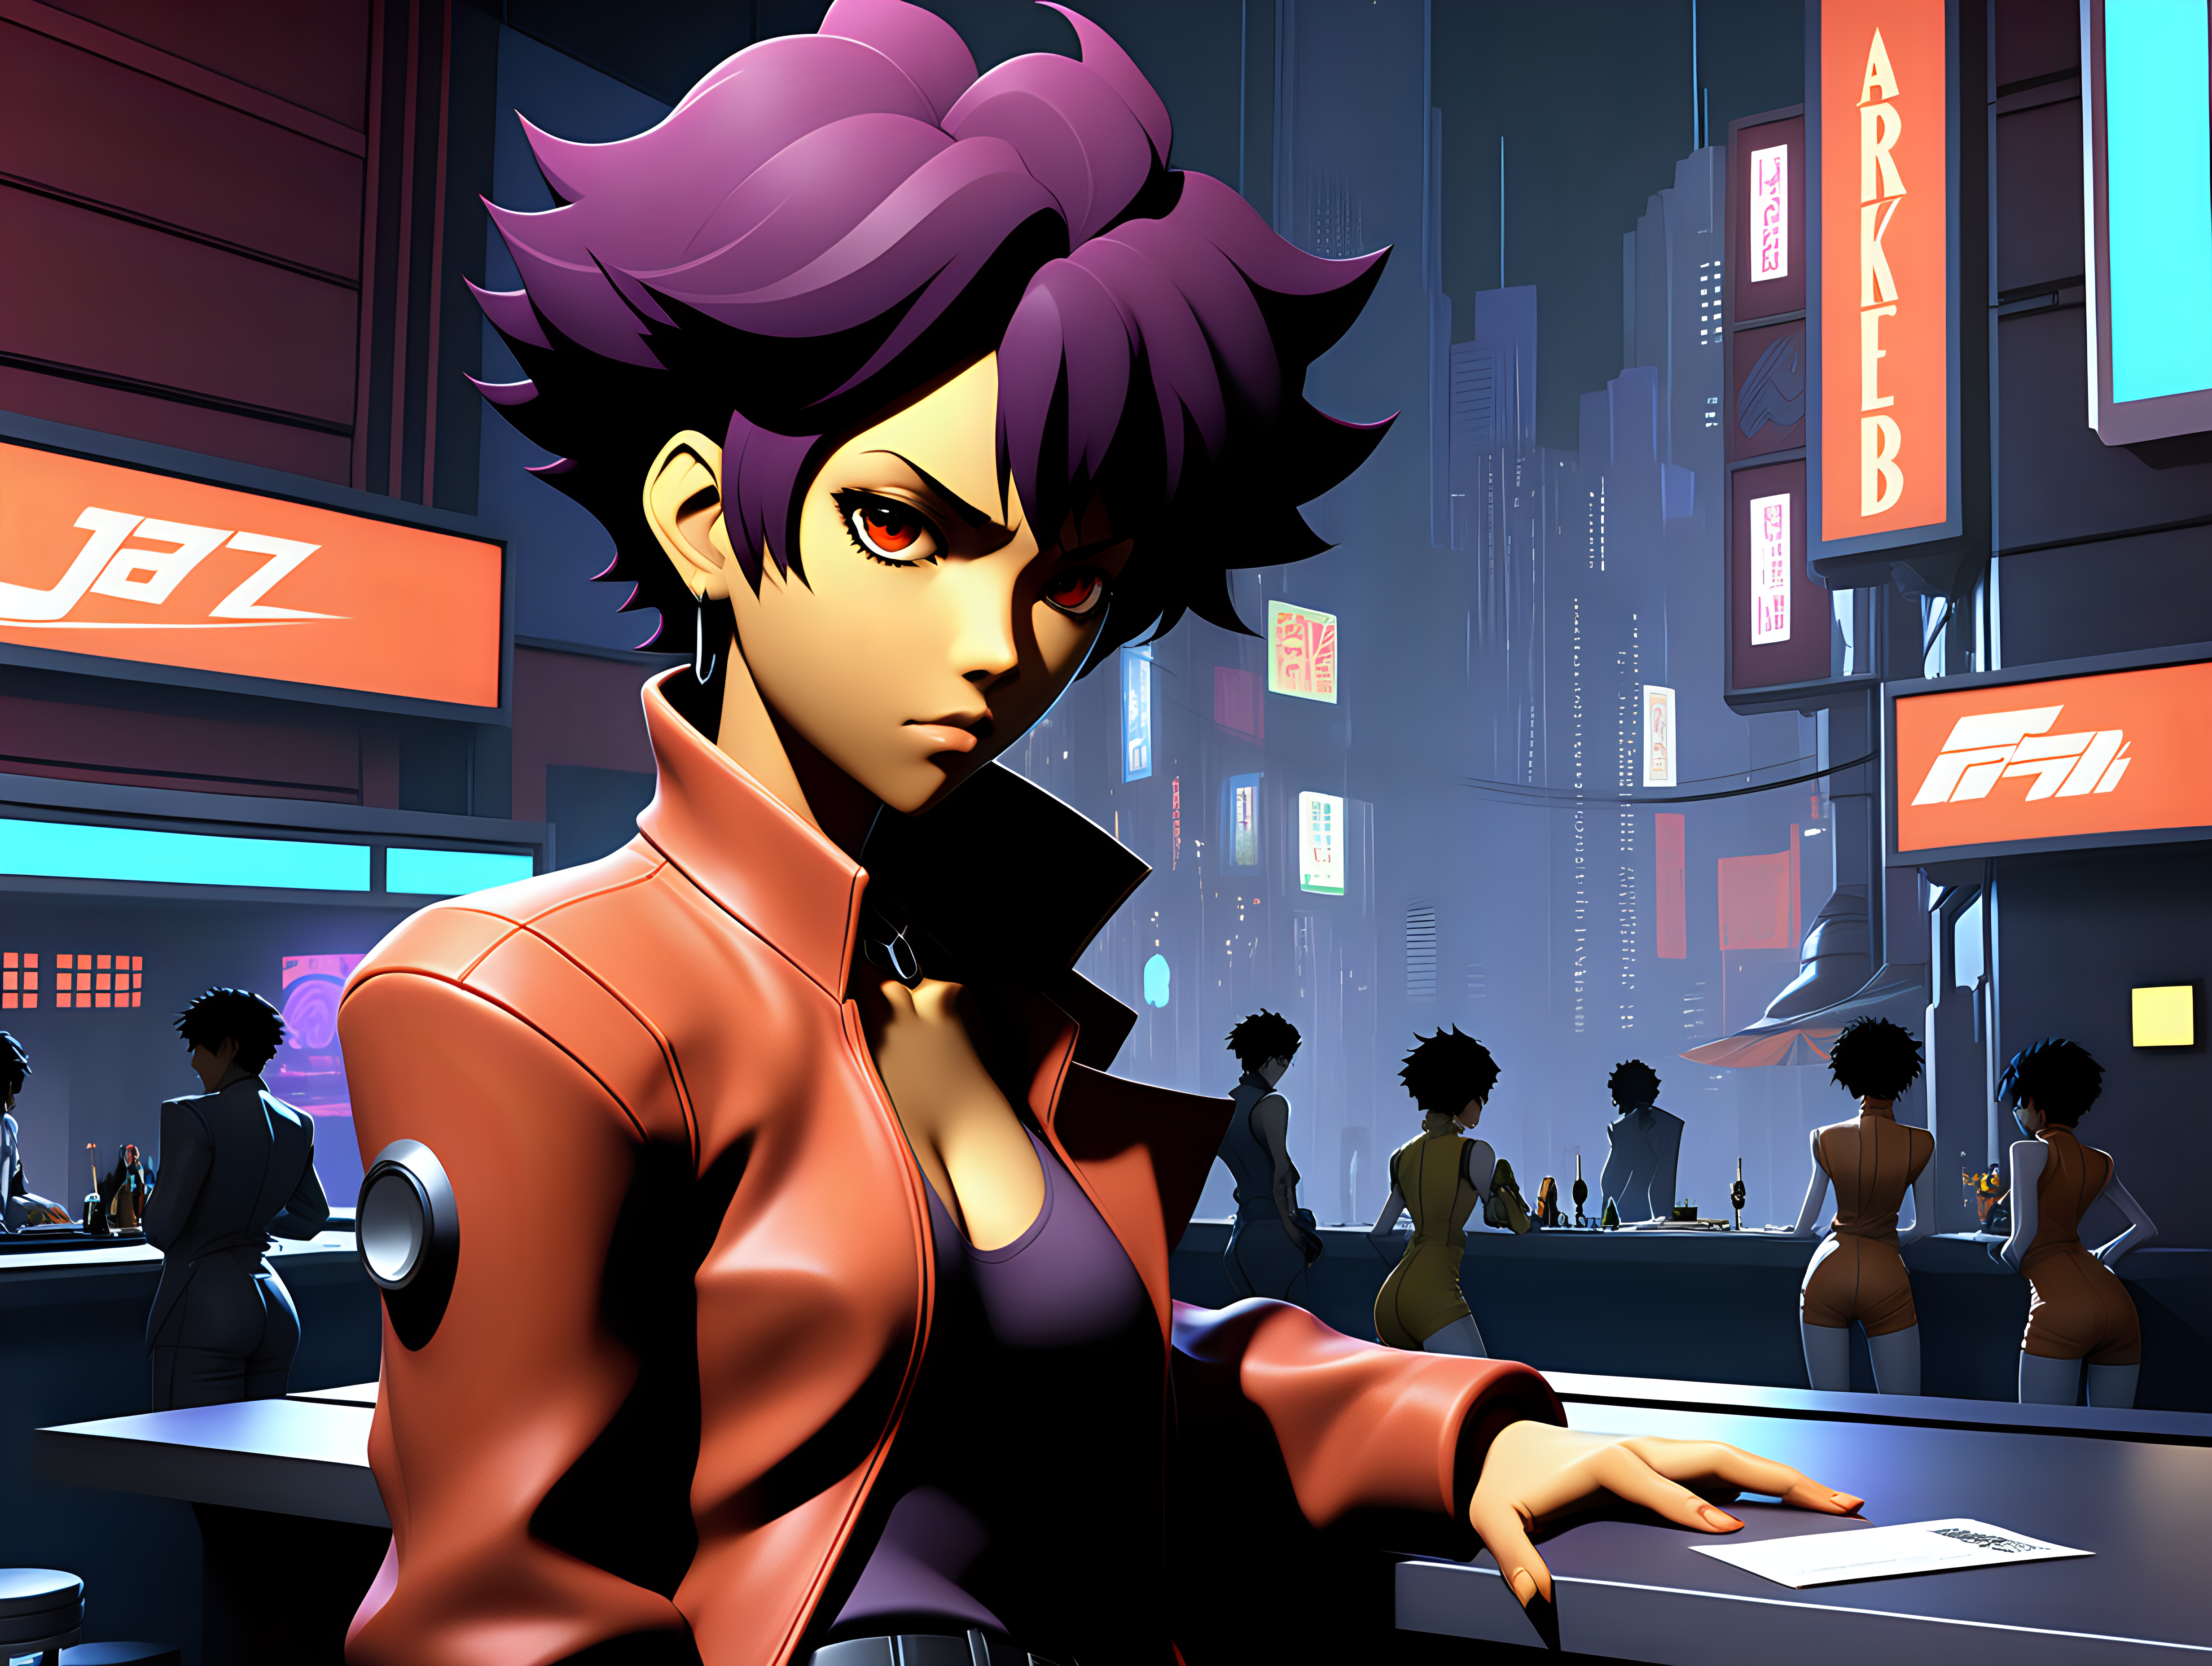 Generate concept art for a JRPG with a jazz-infused soundtrack and an aesthetic inspired by Persona, Cowboy Bebop, and Akira. The scene should prominently feature a main woman character in the front, along with supporting characters, in a vibrant urban environment, specifically in a futuristic bar or nightclub with elements of futuristic technology and a touch of noir.

Incorporate smooth low-poly graphics reminiscent of the PS1 era, capturing the essence of classic JRPGs. The art style should draw inspiration from the stylish and dynamic visuals of Persona, the gritty cyberpunk atmosphere of Akira, and the jazzy, adventurous feel of Cowboy Bebop. Set the scene in a bustling city with neon lights, futuristic architecture, and a jazz club or district.

Highlight the main and supporting characters in a way that reflects their personalities and the overall tone of the game. The soundtrack should evoke the soulful and improvisational spirit of jazz, setting the mood for the JRPG adventure.

Embrace the fusion of futuristic technology, jazz influences, and the captivating aesthetics of Persona, Cowboy Bebop, and Akira, delivering a visually stunning and immersive concept for a JRPG with a futuristic bar or nightclub background, prominently featuring the main character in the front.